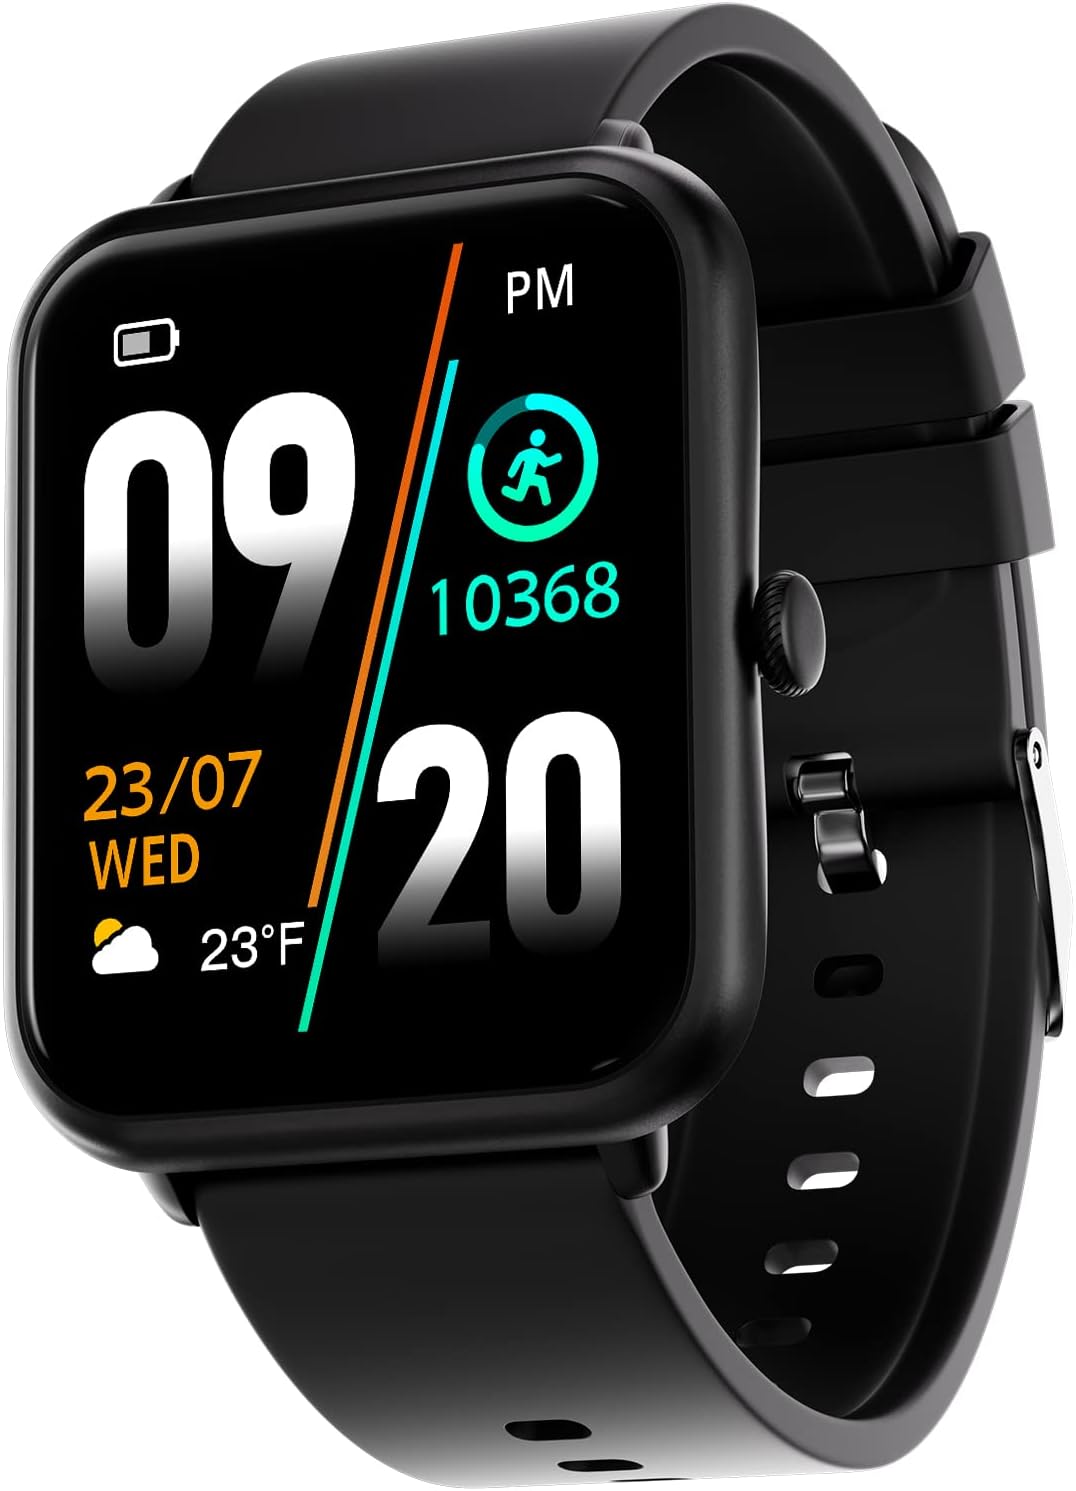 Fire-Boltt Ninja Call Pro Smart Watch Dual Chip Bluetooth Calling, 1.69" Display, AI Voice Assistance with 100 Sports Modes, with SpO2 & Heart Rate Monitoring (Black)